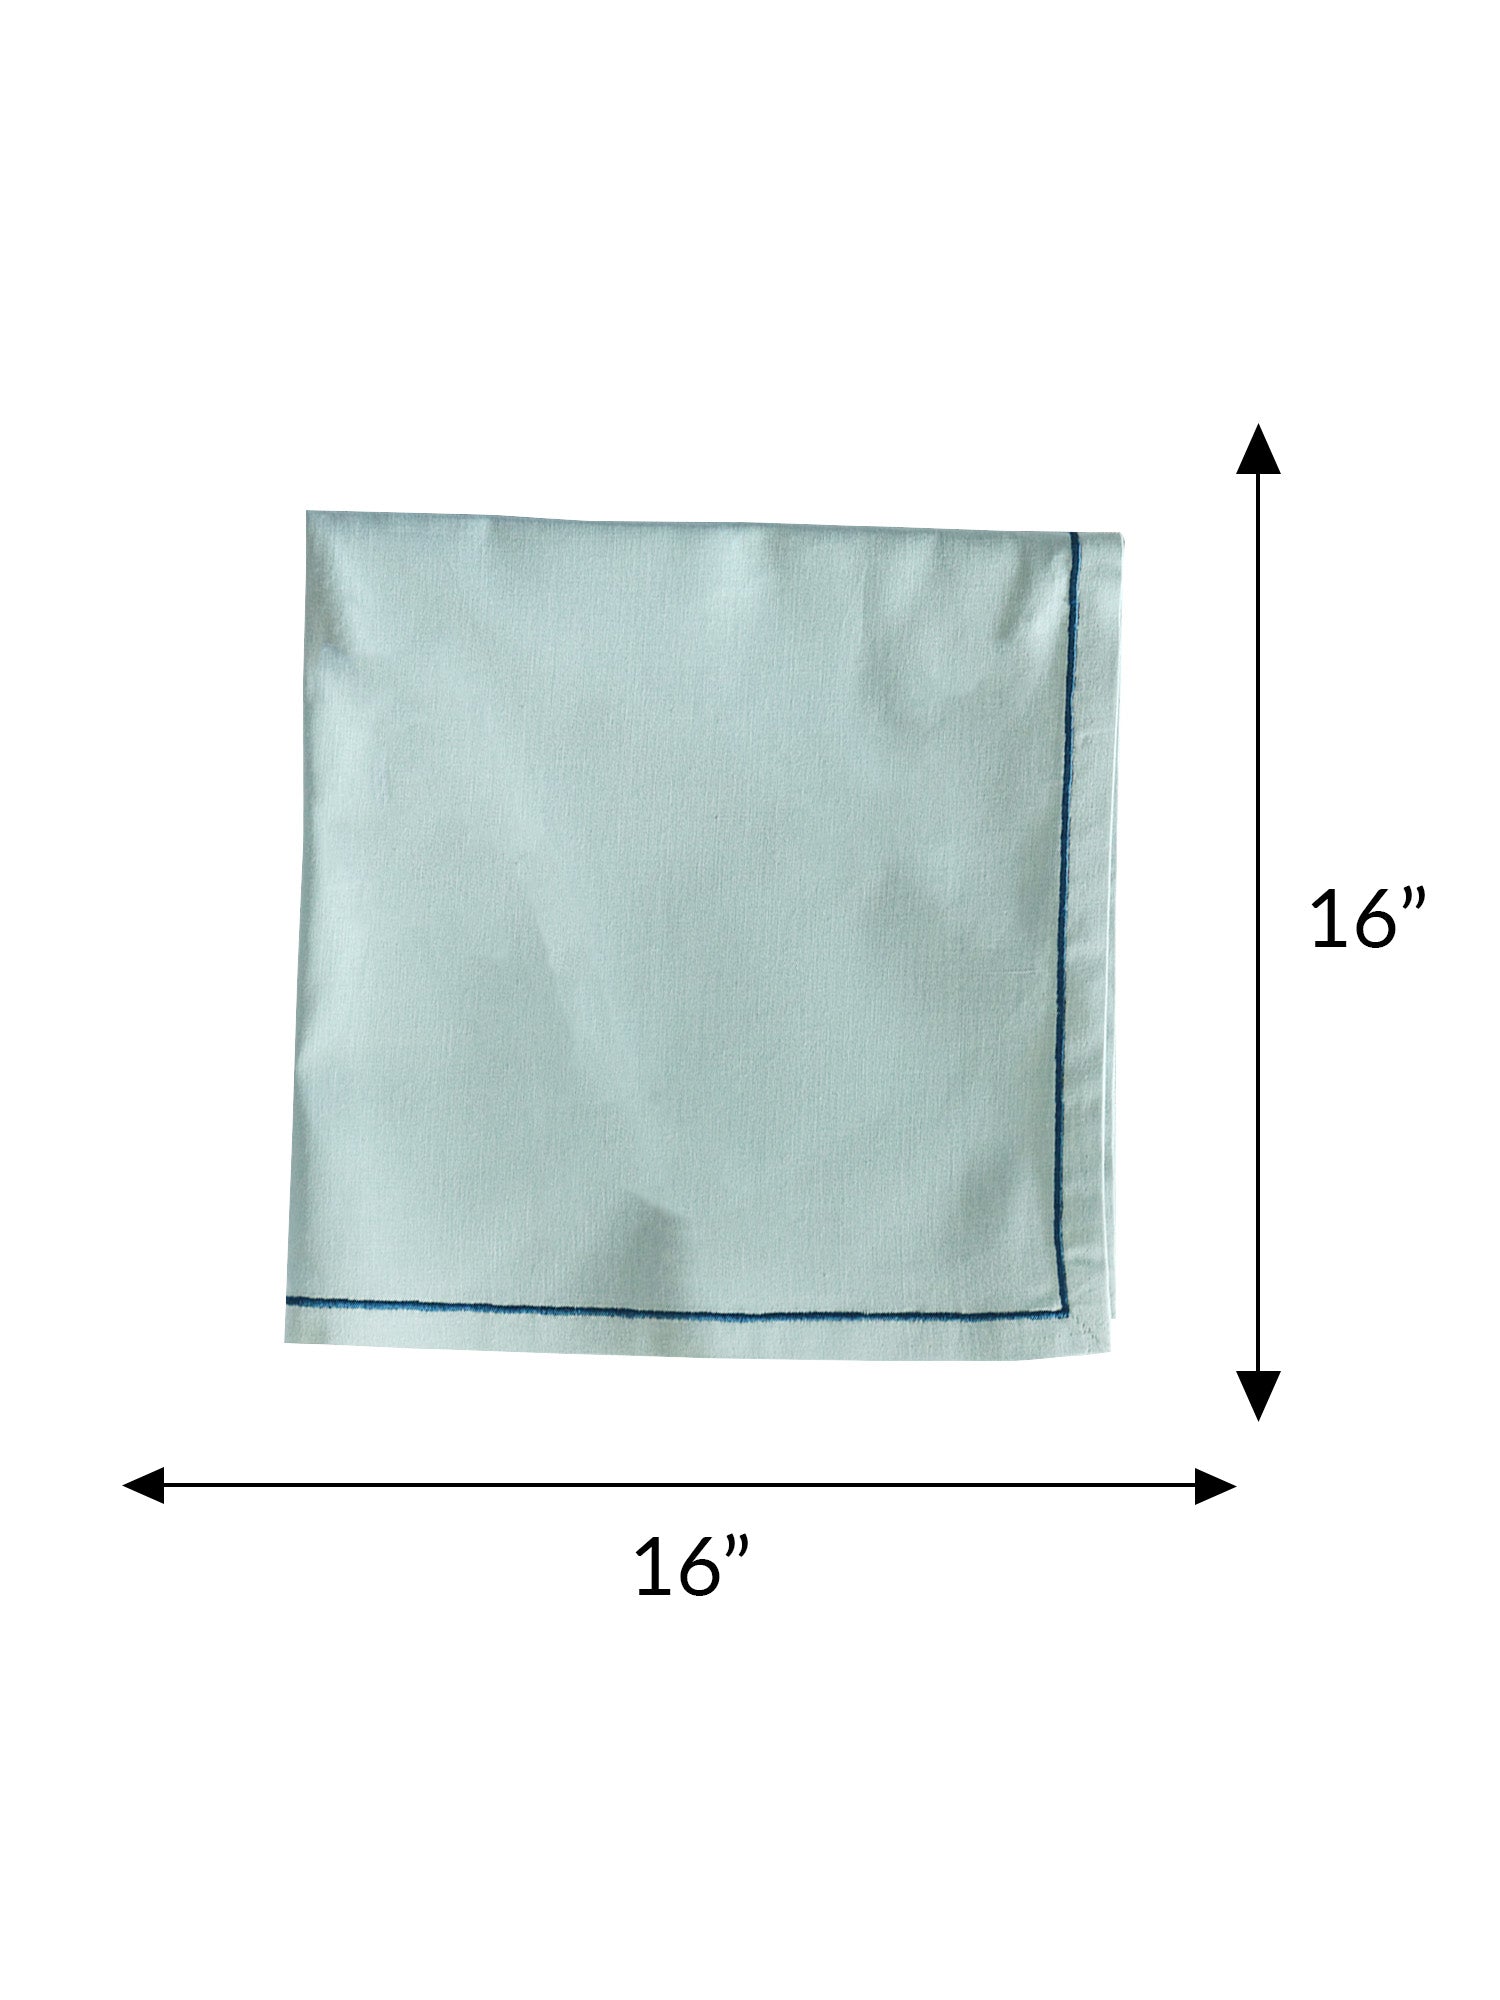 set of 6, embroidered napkins in blue - 16x16 inch